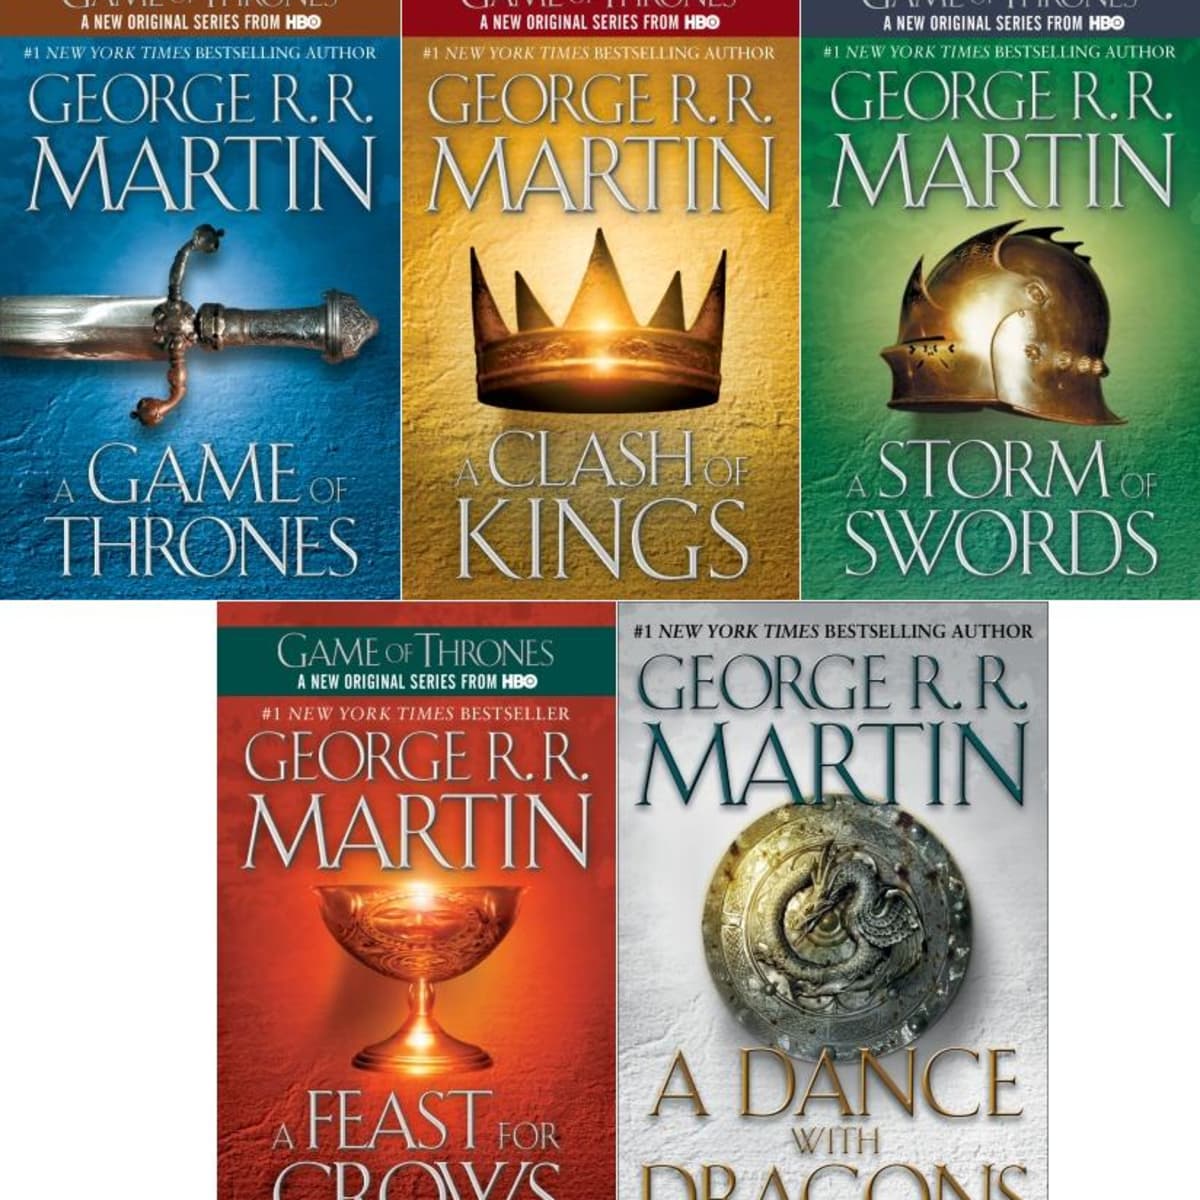 A Summary of “A Clash of Kings” by George R. R. Martin